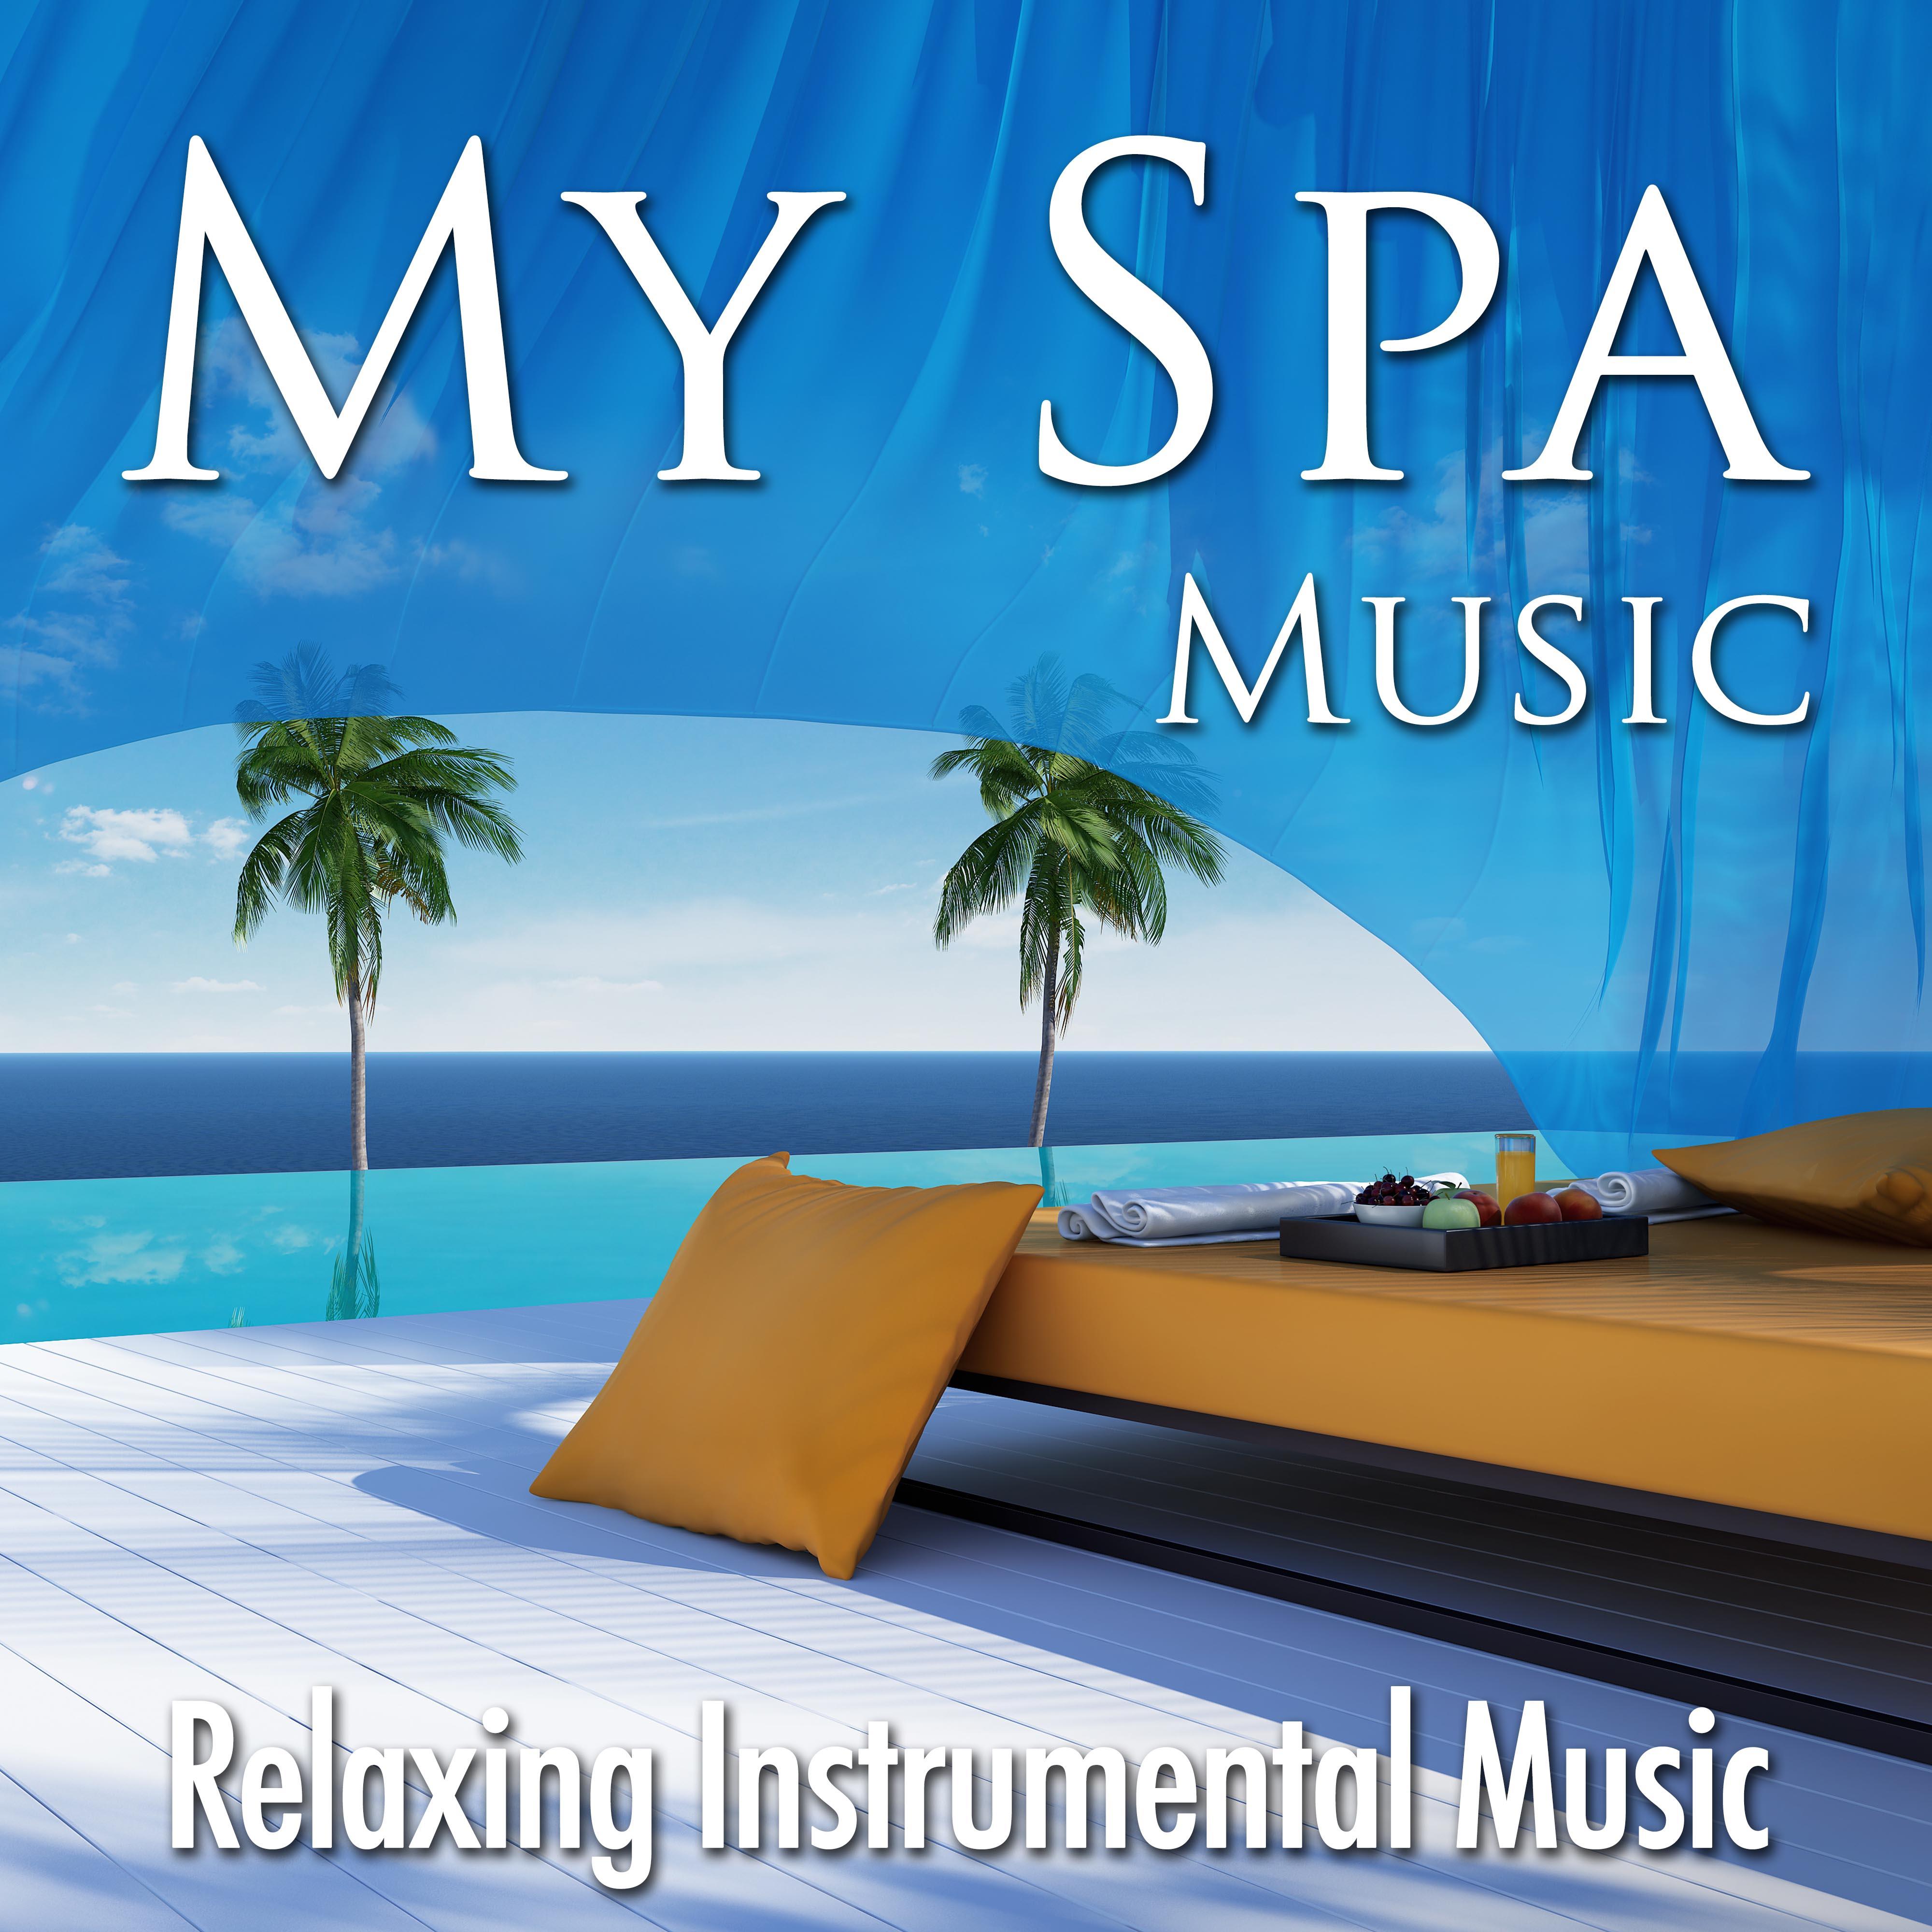 My Spa Music - Relaxing Instrumental Music for Spas and Wellness Centers with Nature Sounds for Intimate Moments and Sensual Nights at Home for Romantic Dinners with your Partner